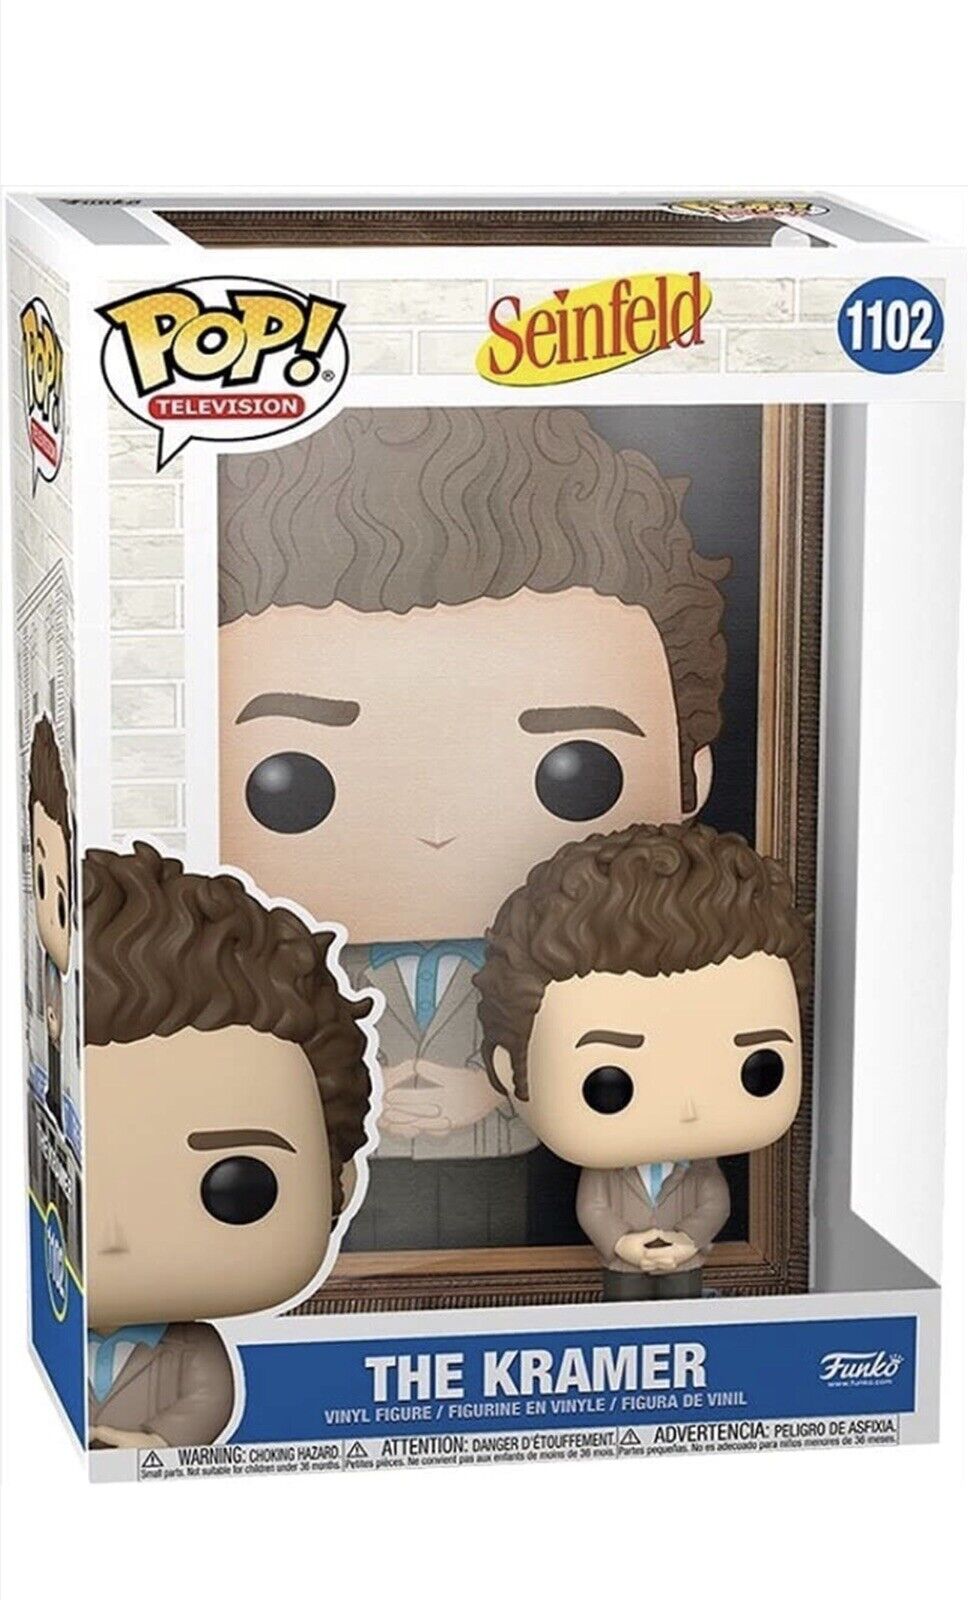 Funko Pop Television Seinfeld The Kramer # 1102 Target Exclusive NEW